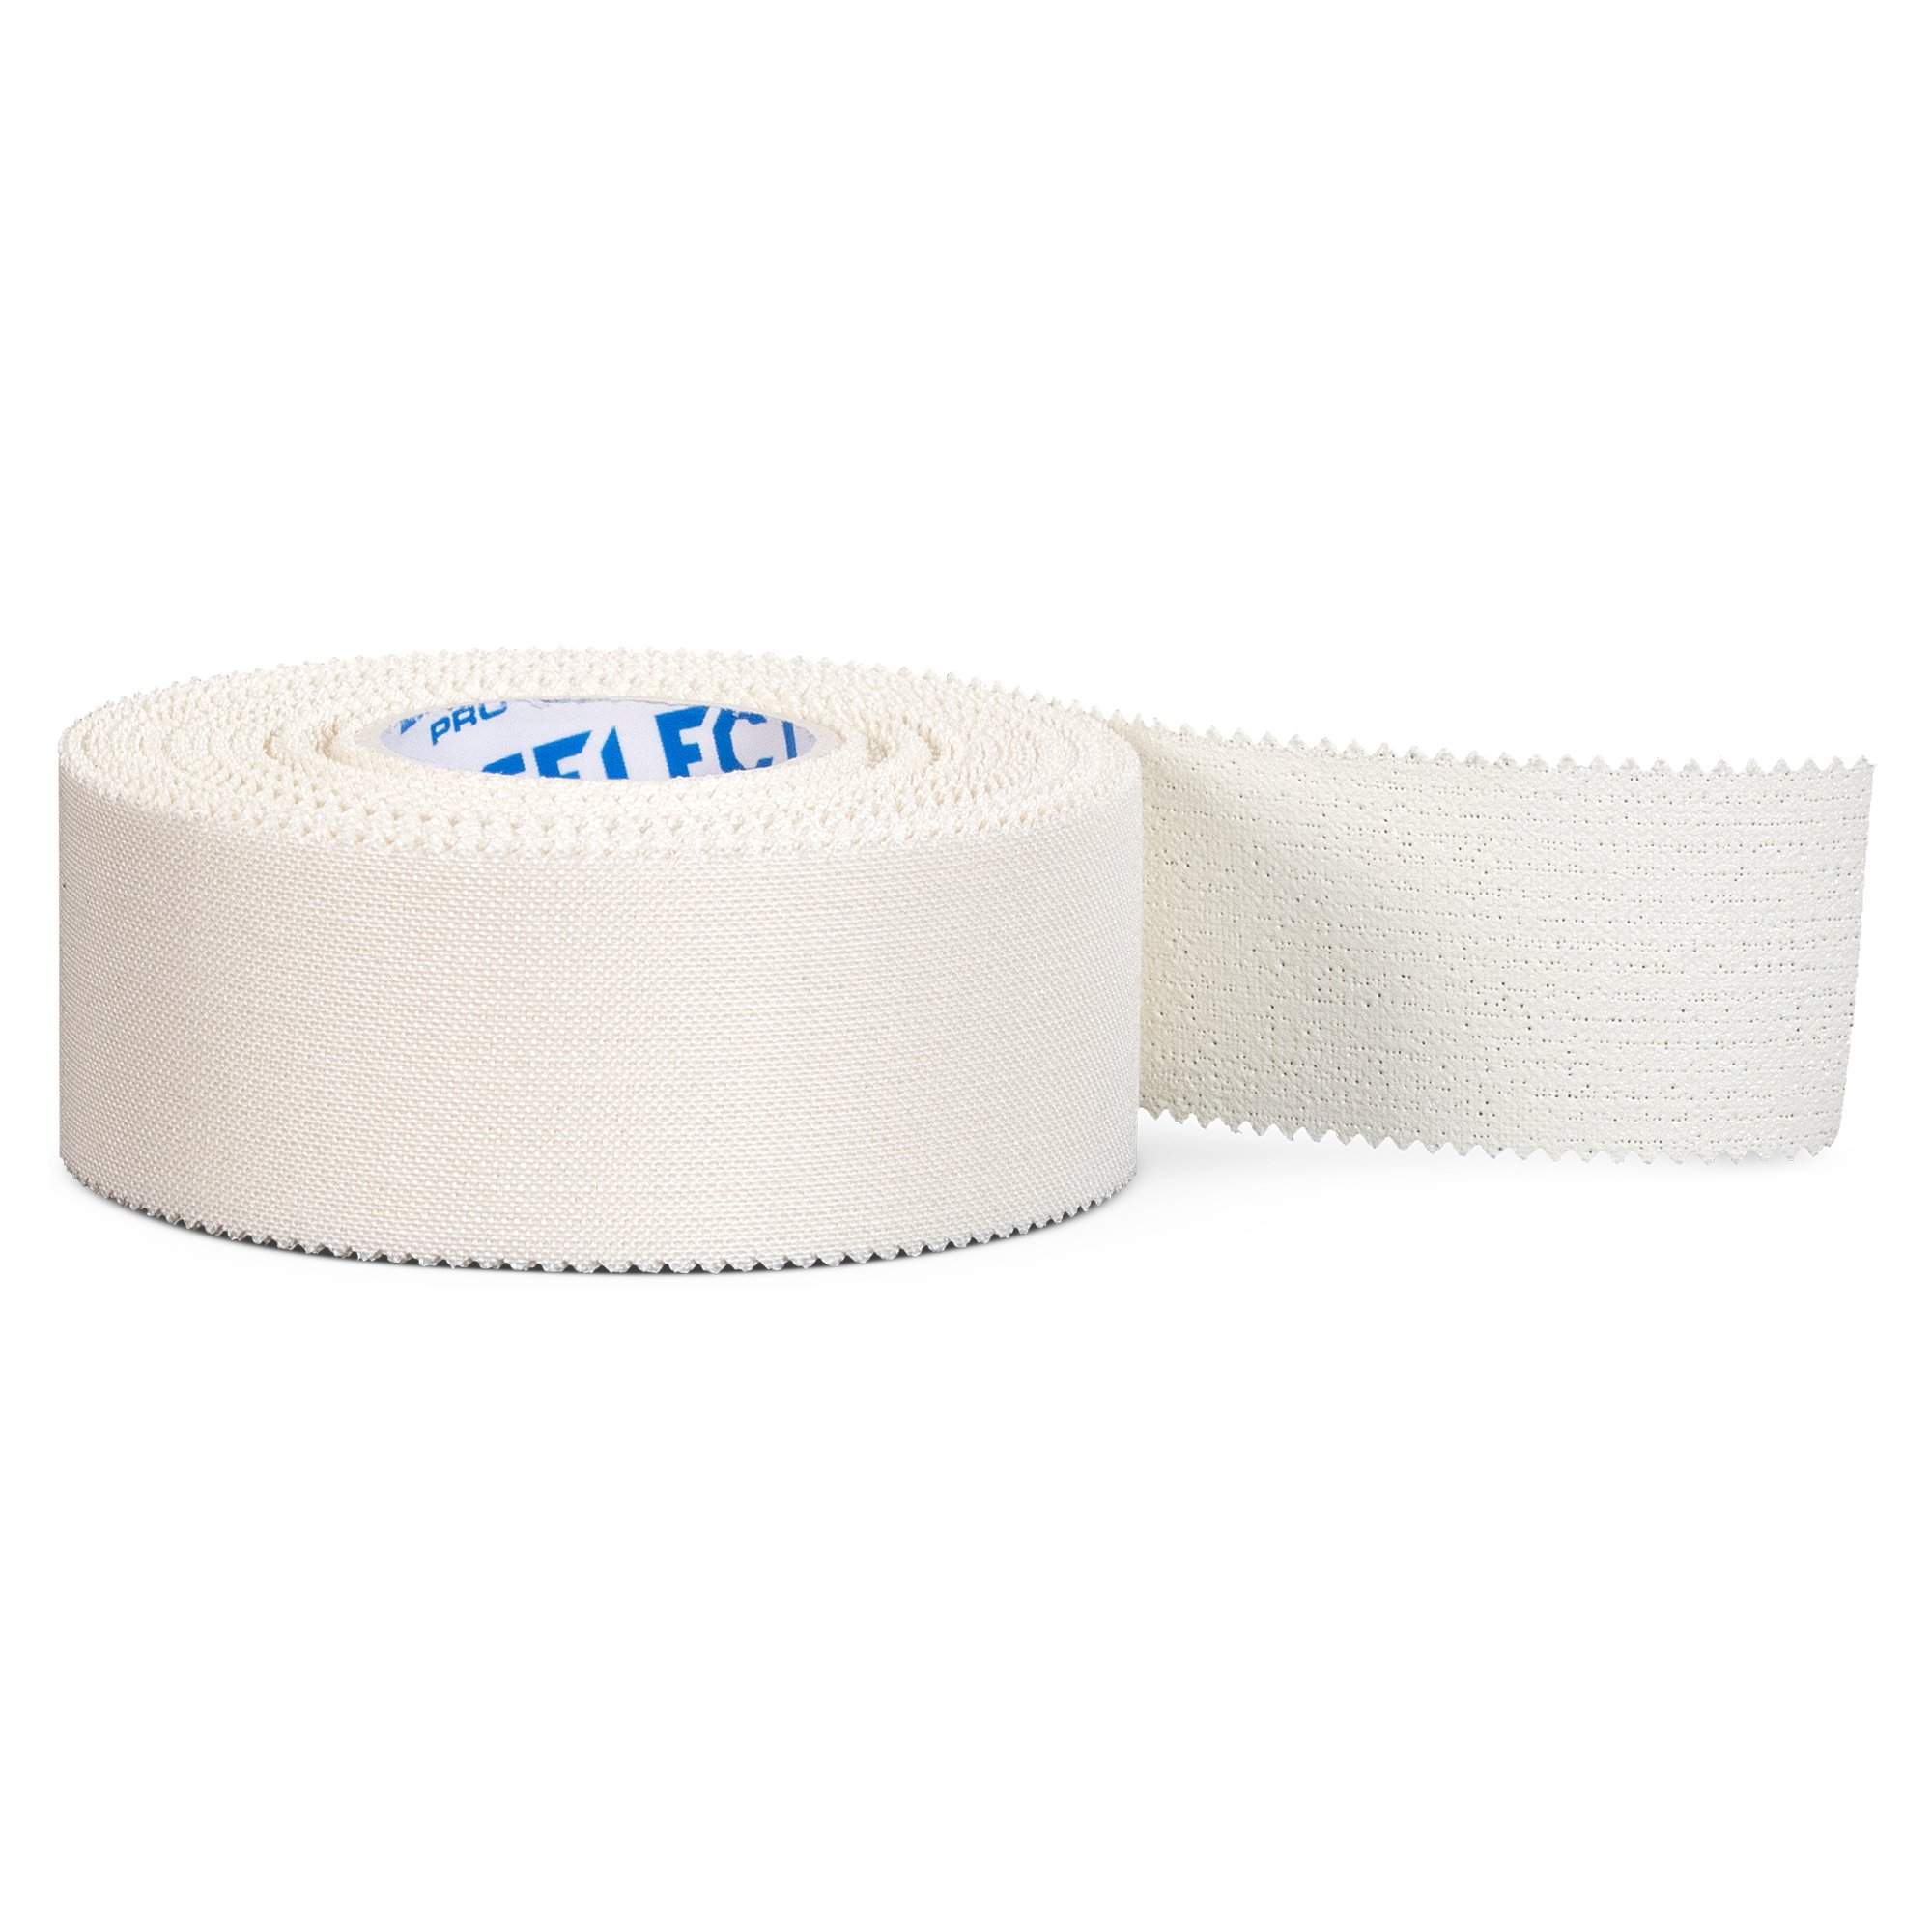 Select Pro Strap Tape II 2-pack